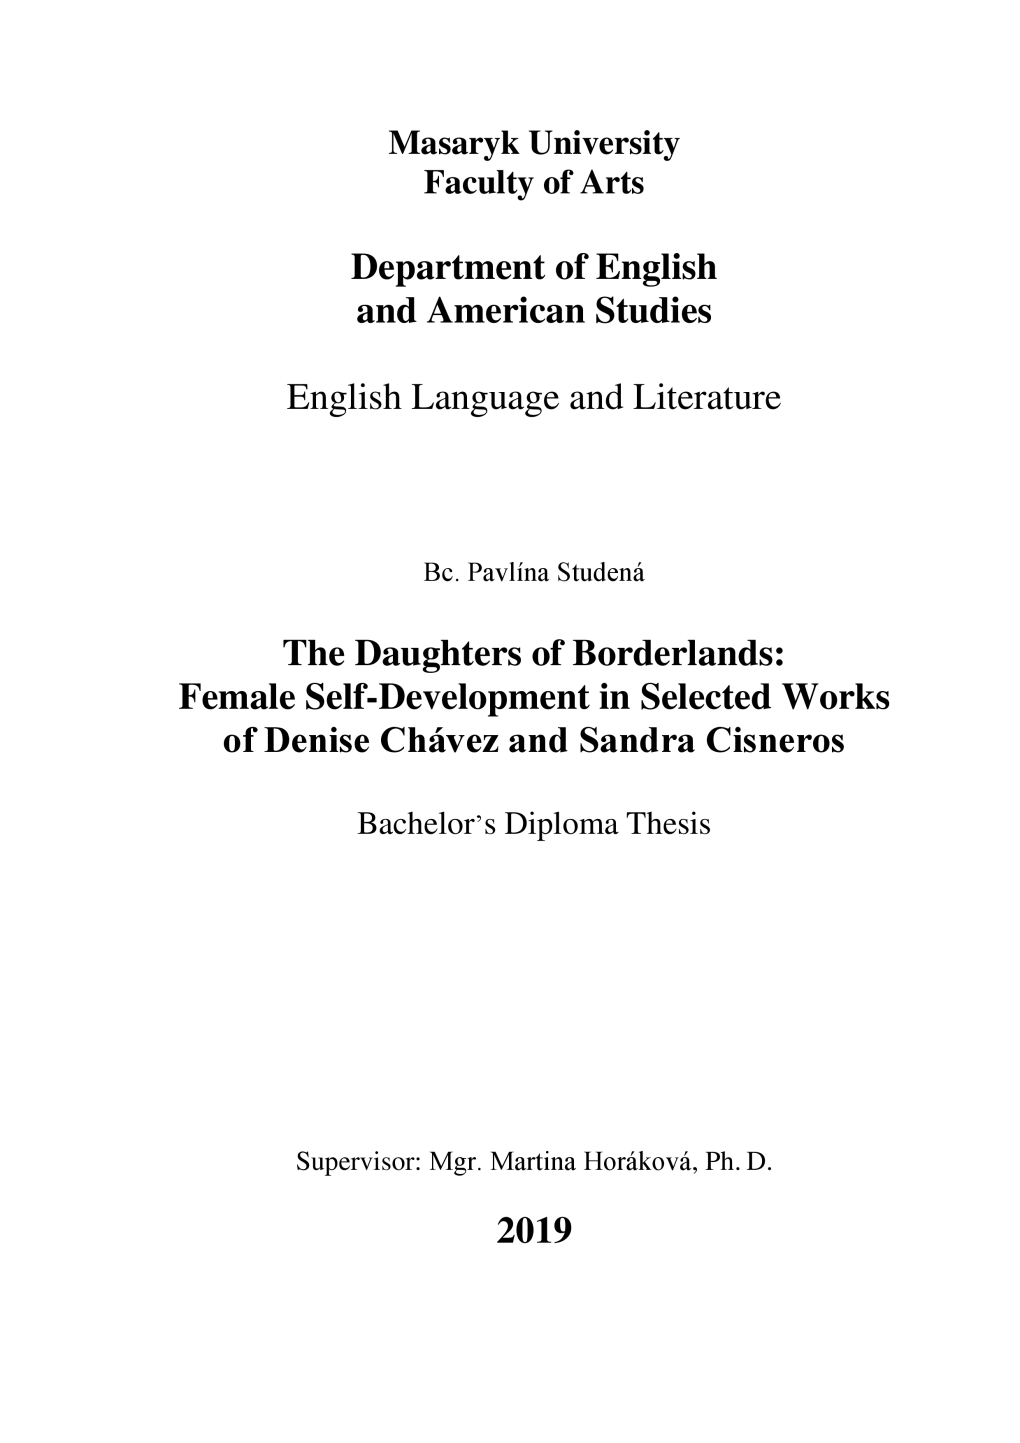 The Daughters of Borderlands: Female Self-Development in Selected Works of Denise Chavez and Sandra Cisneros